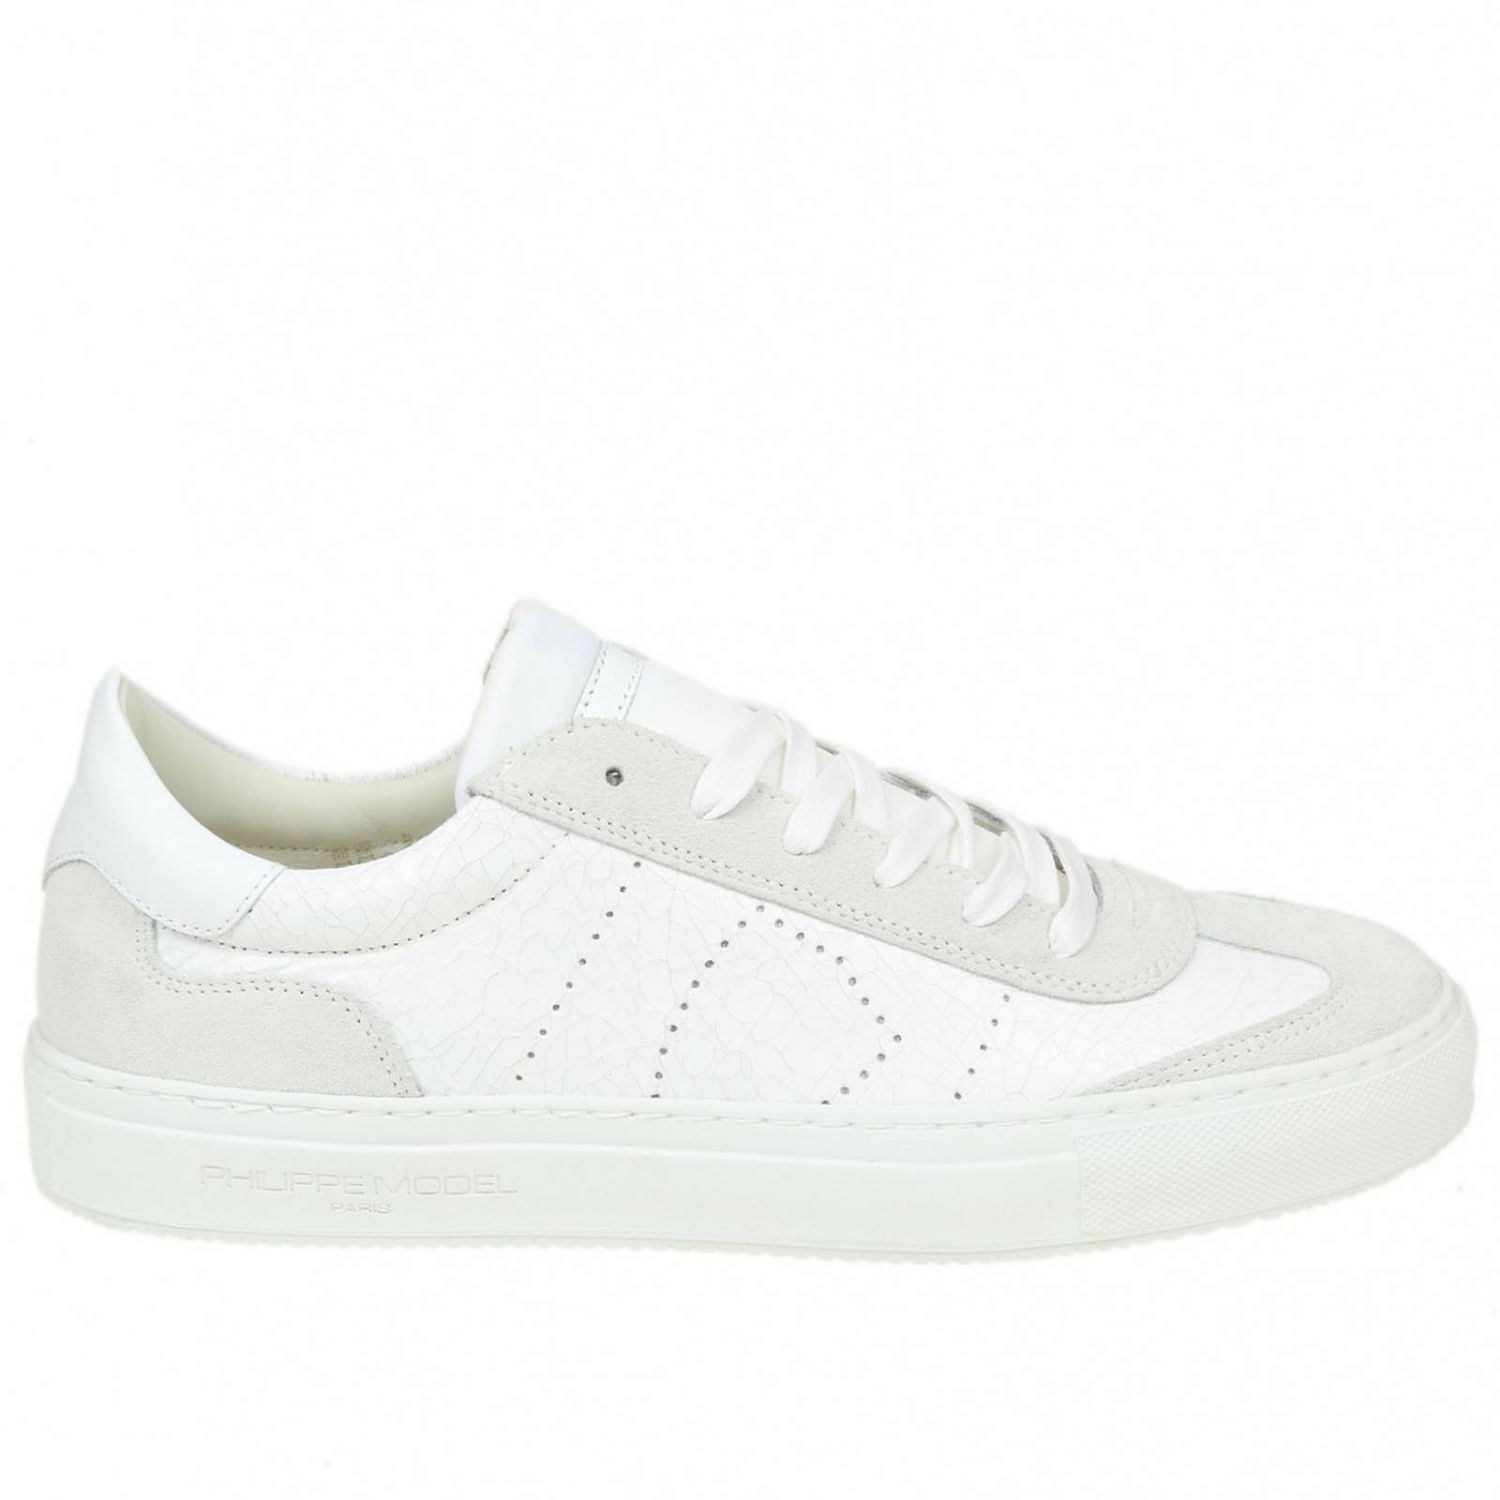 Philippe Model Outlet: Sneakers men - White | Sneakers Philippe Model ...